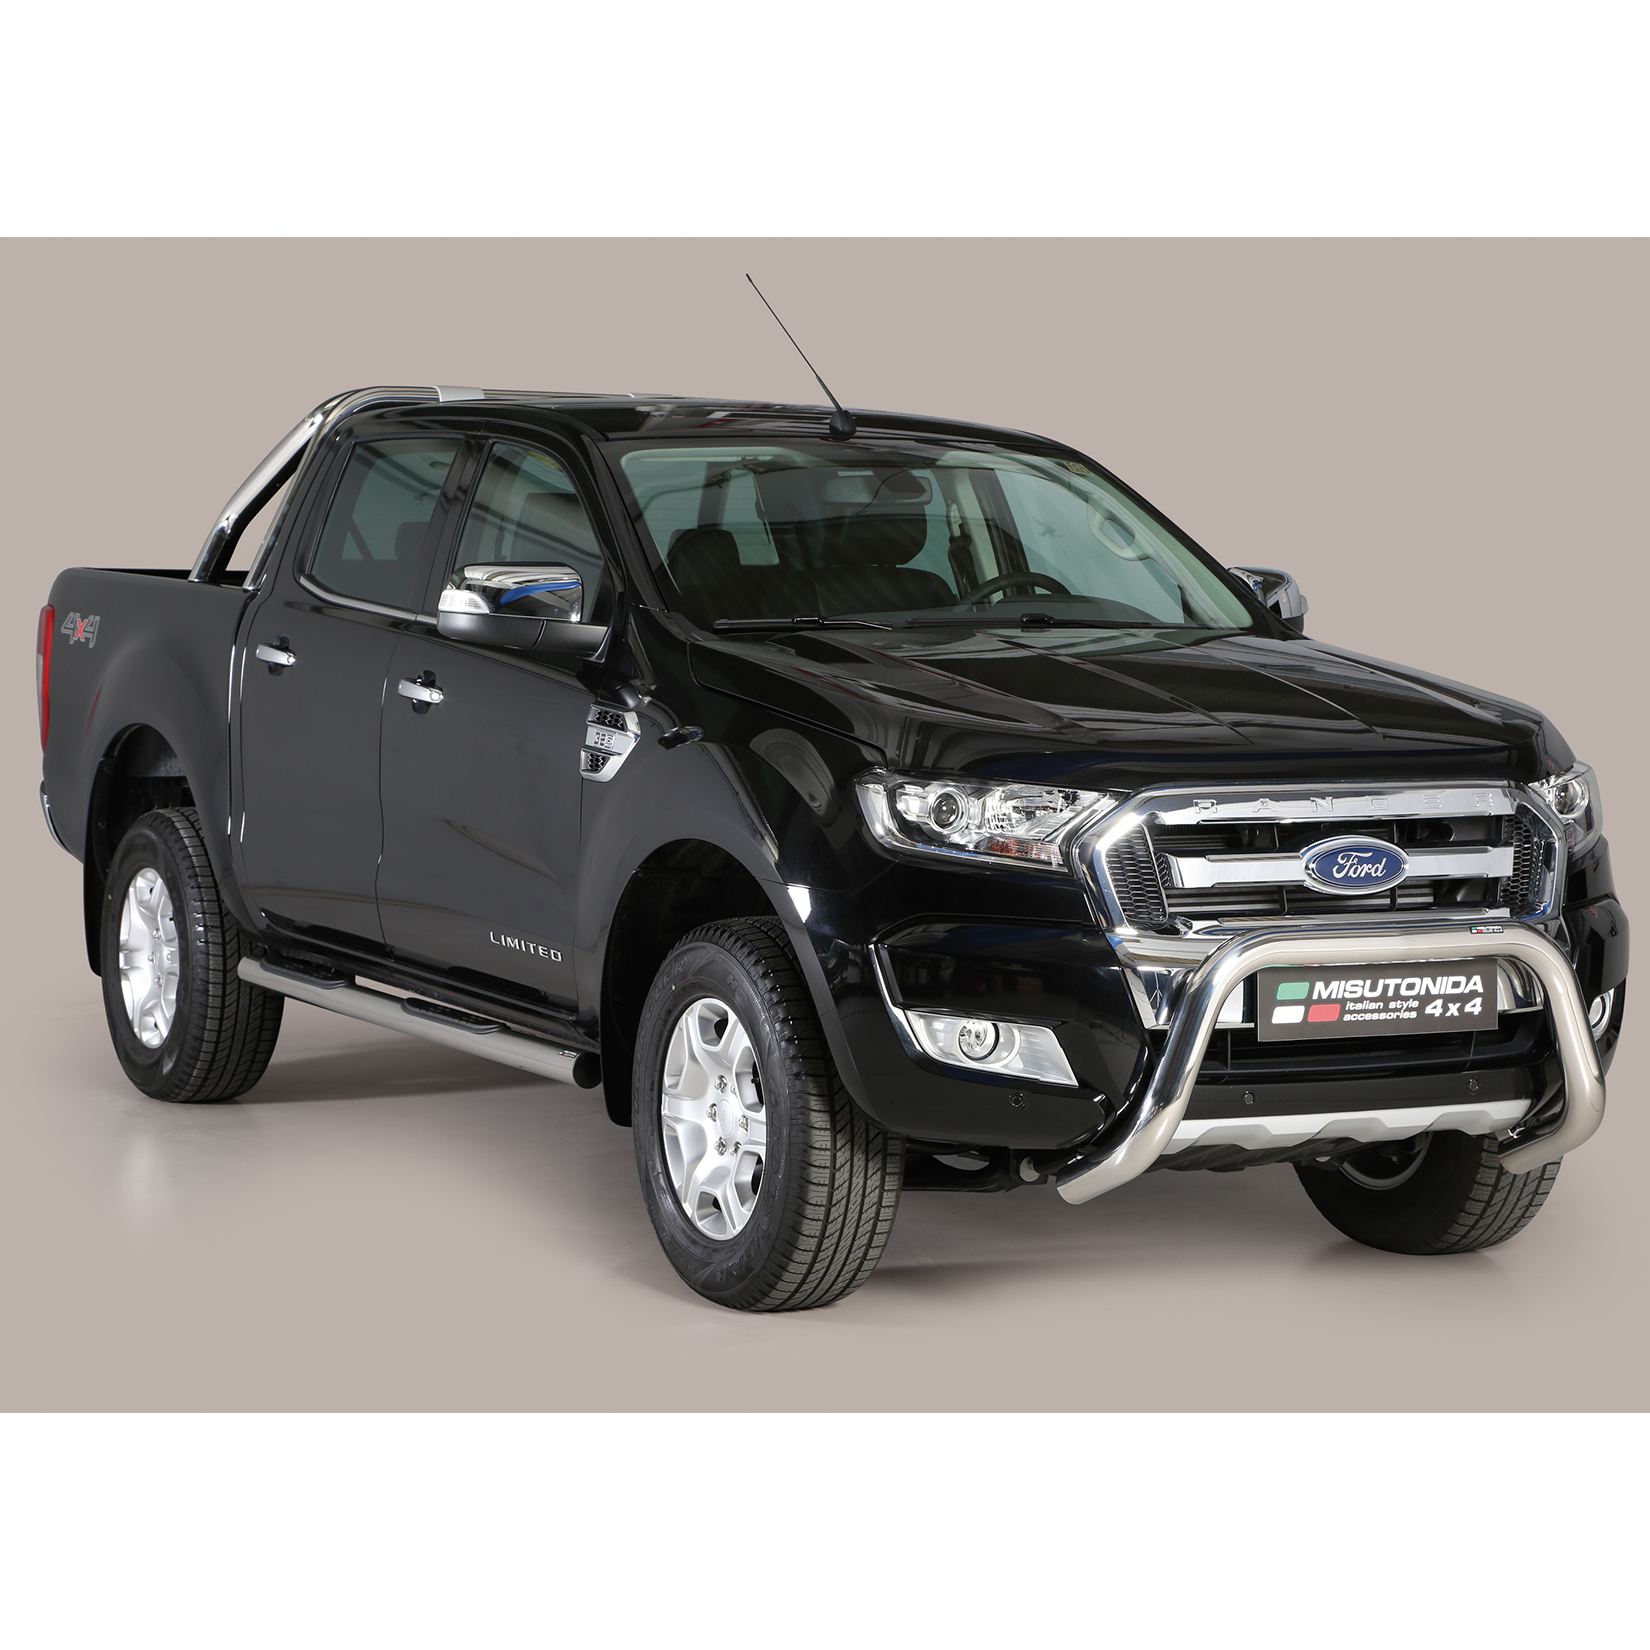 Ford Ranger T6 2012-2022 - Misutonida Ec Approved Front Bar - 76mm - Stainless Finish